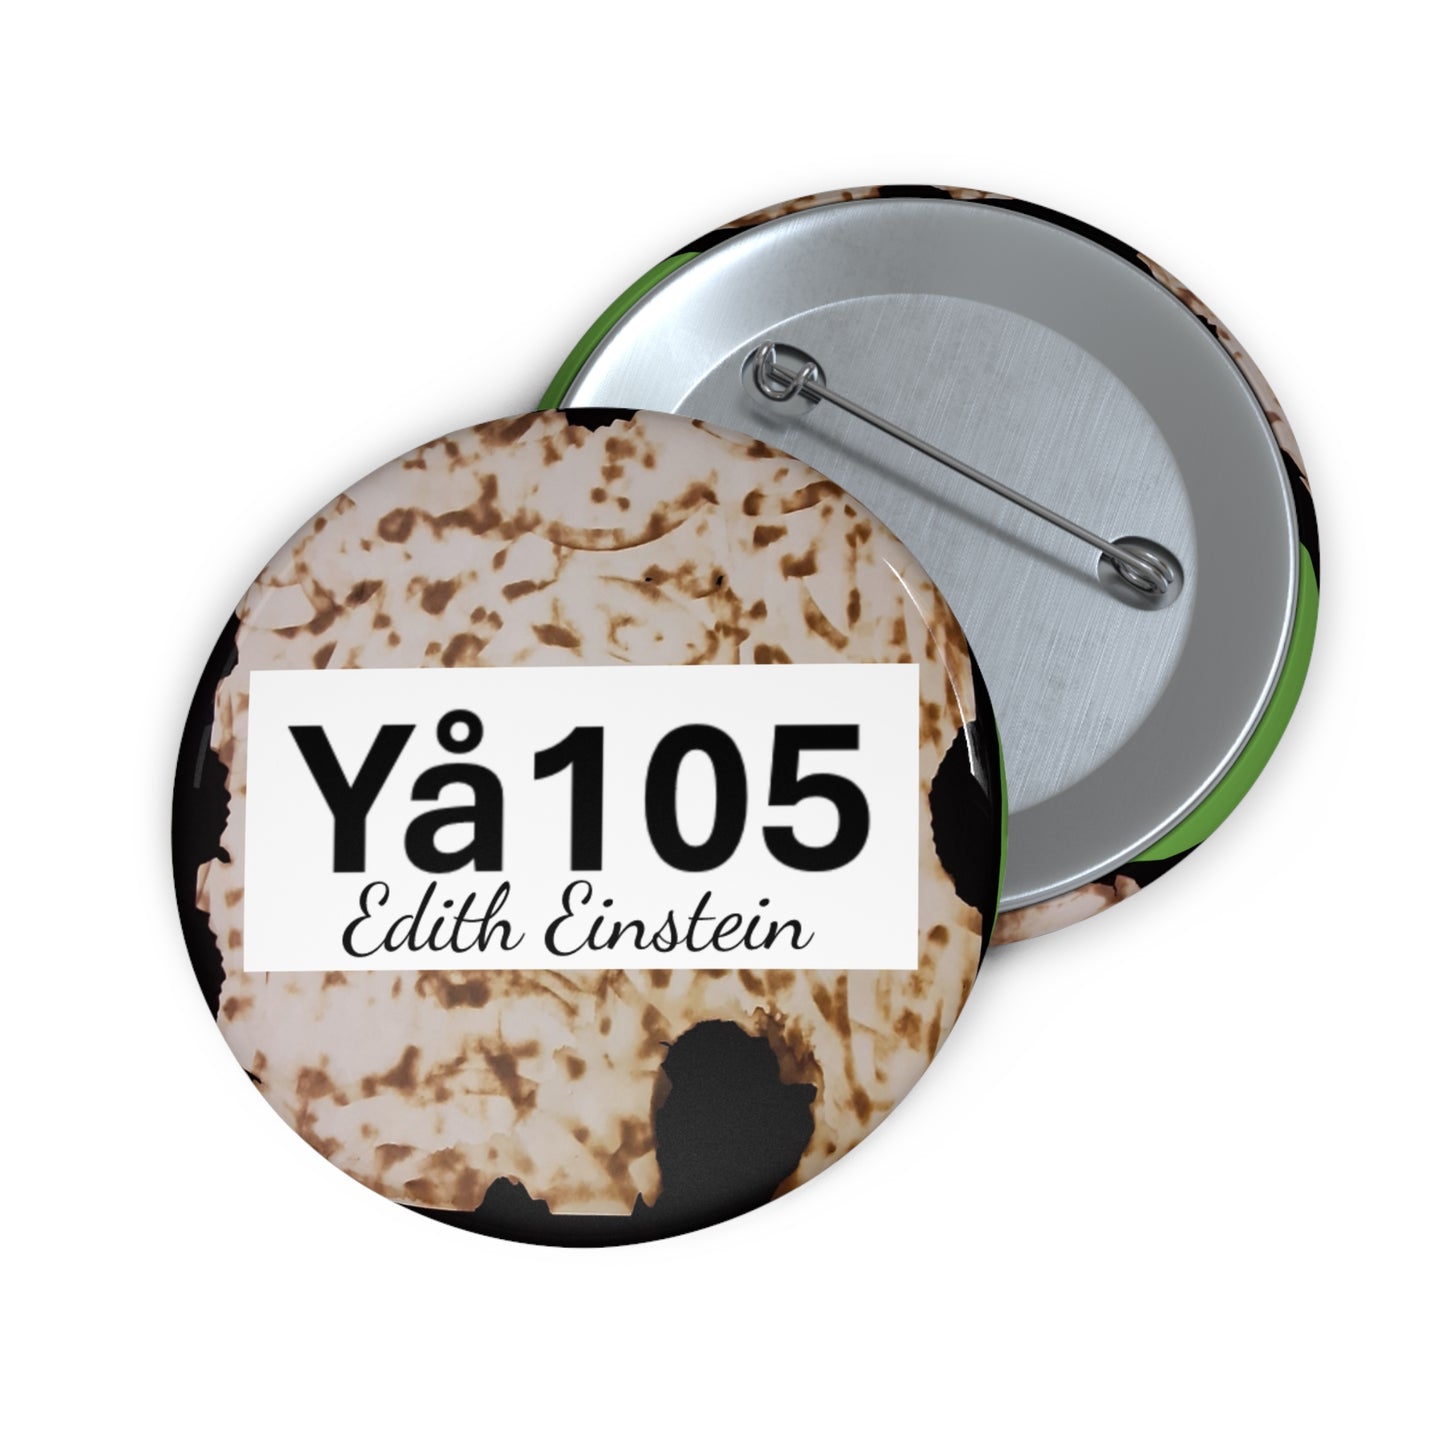 CODED YOUTH Pin Buttons 105 - 6